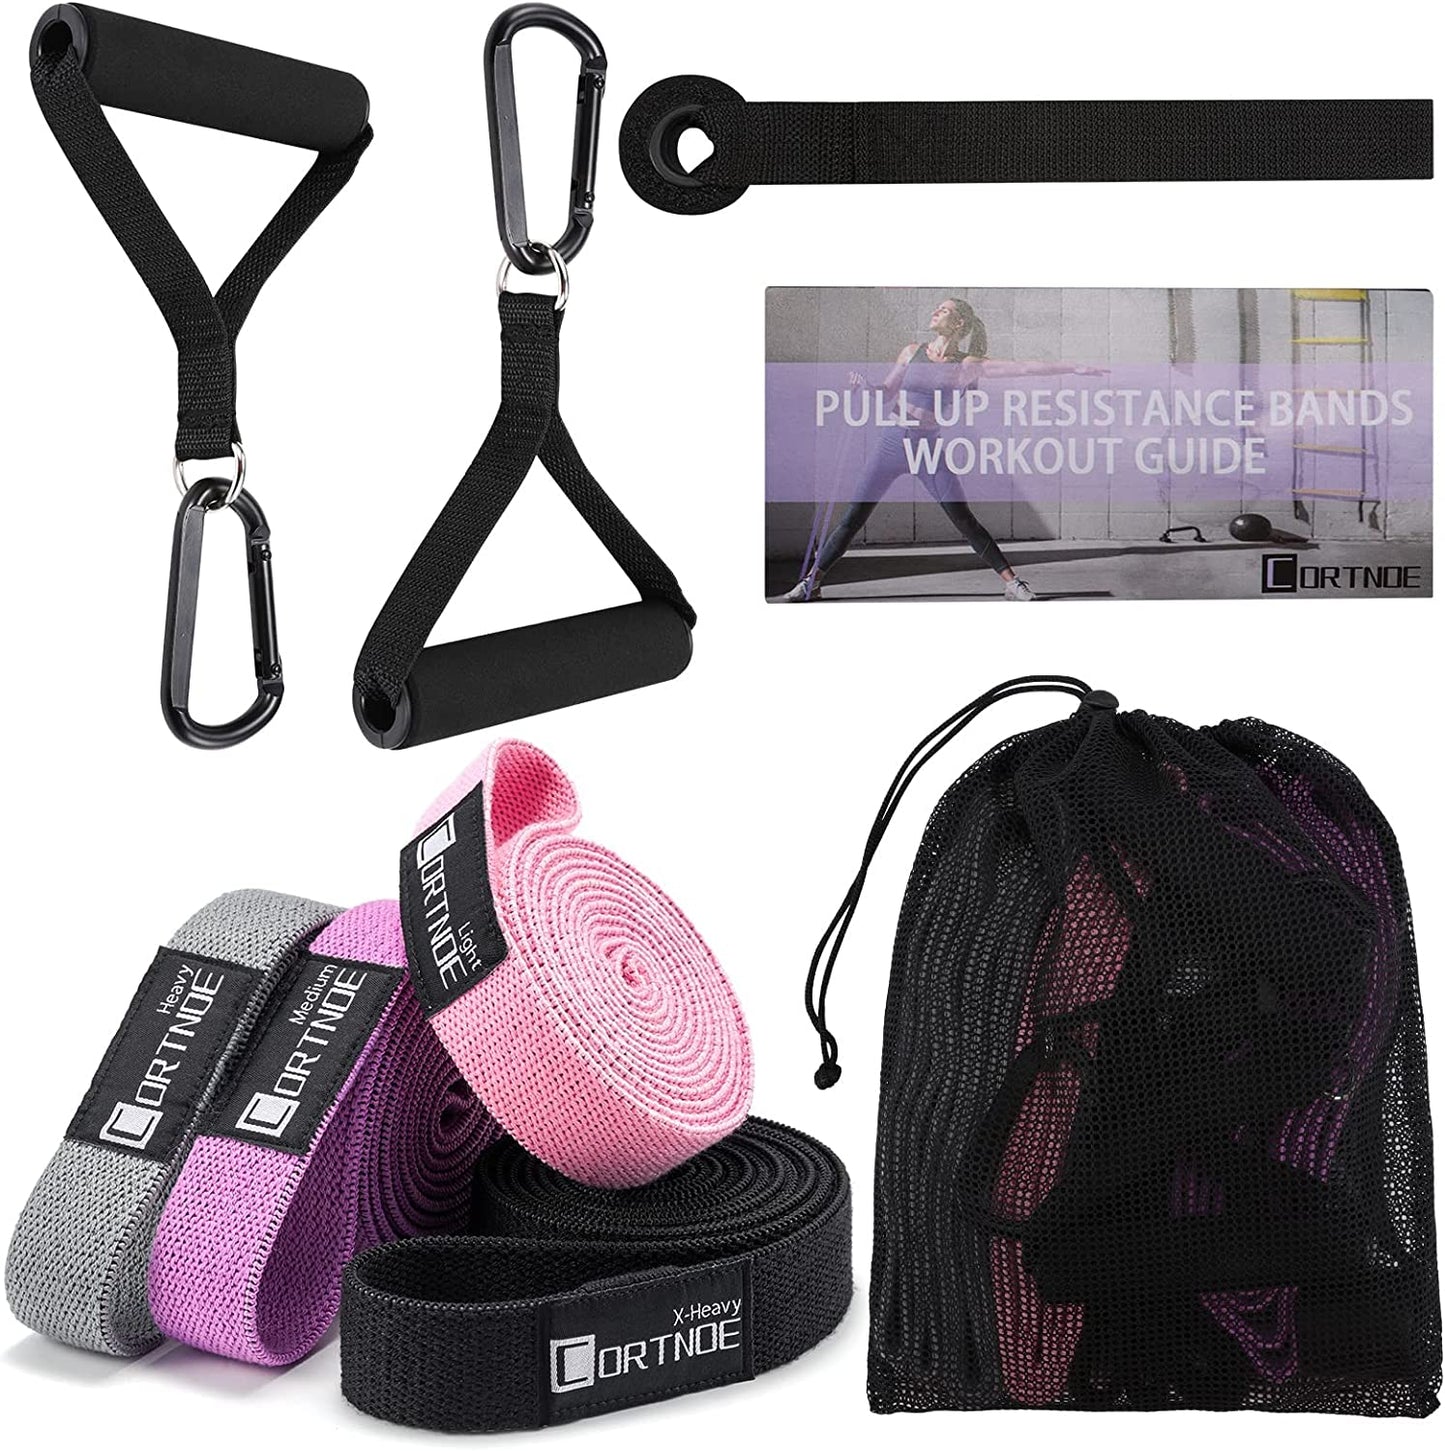 Fabric Long Resistance Bands - Pull up Bands Pull up Assistance Bands Long Workout Bands with Handles, Exercise Bands for Working Out